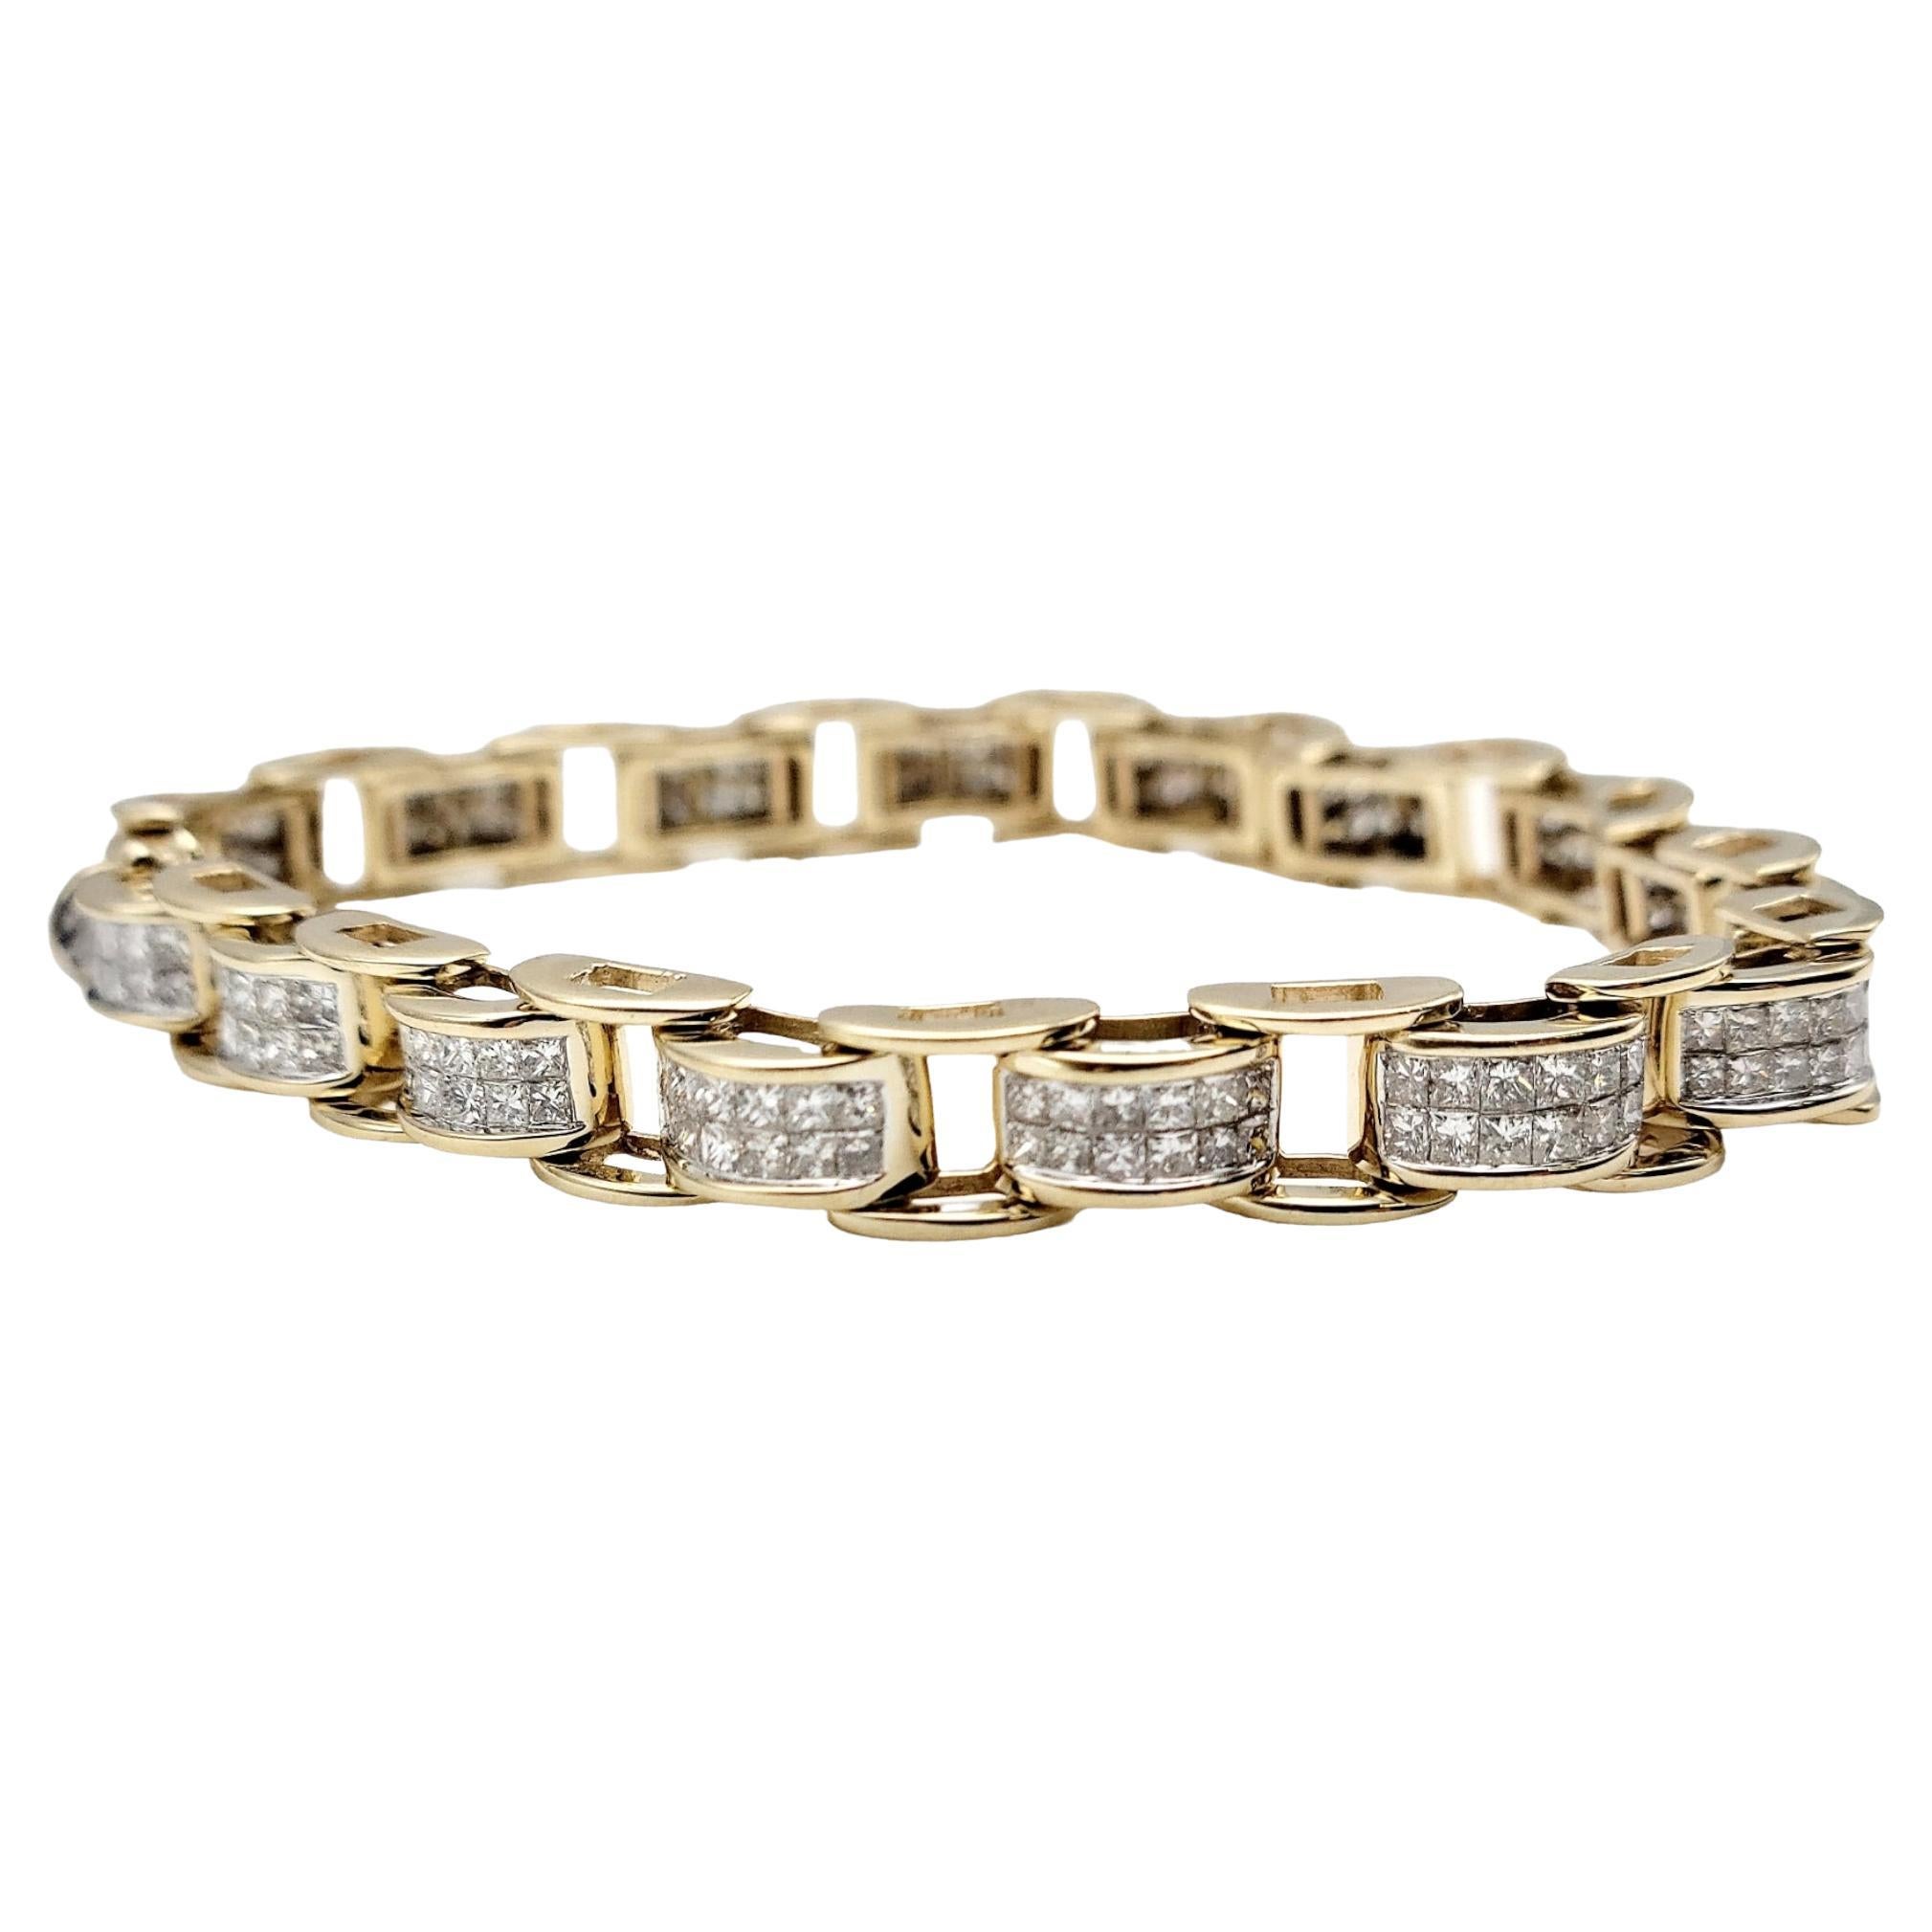 5.00 Carats Total Princess Cut Diamond Bike Chain Style Bracelet in Yellow Gold For Sale